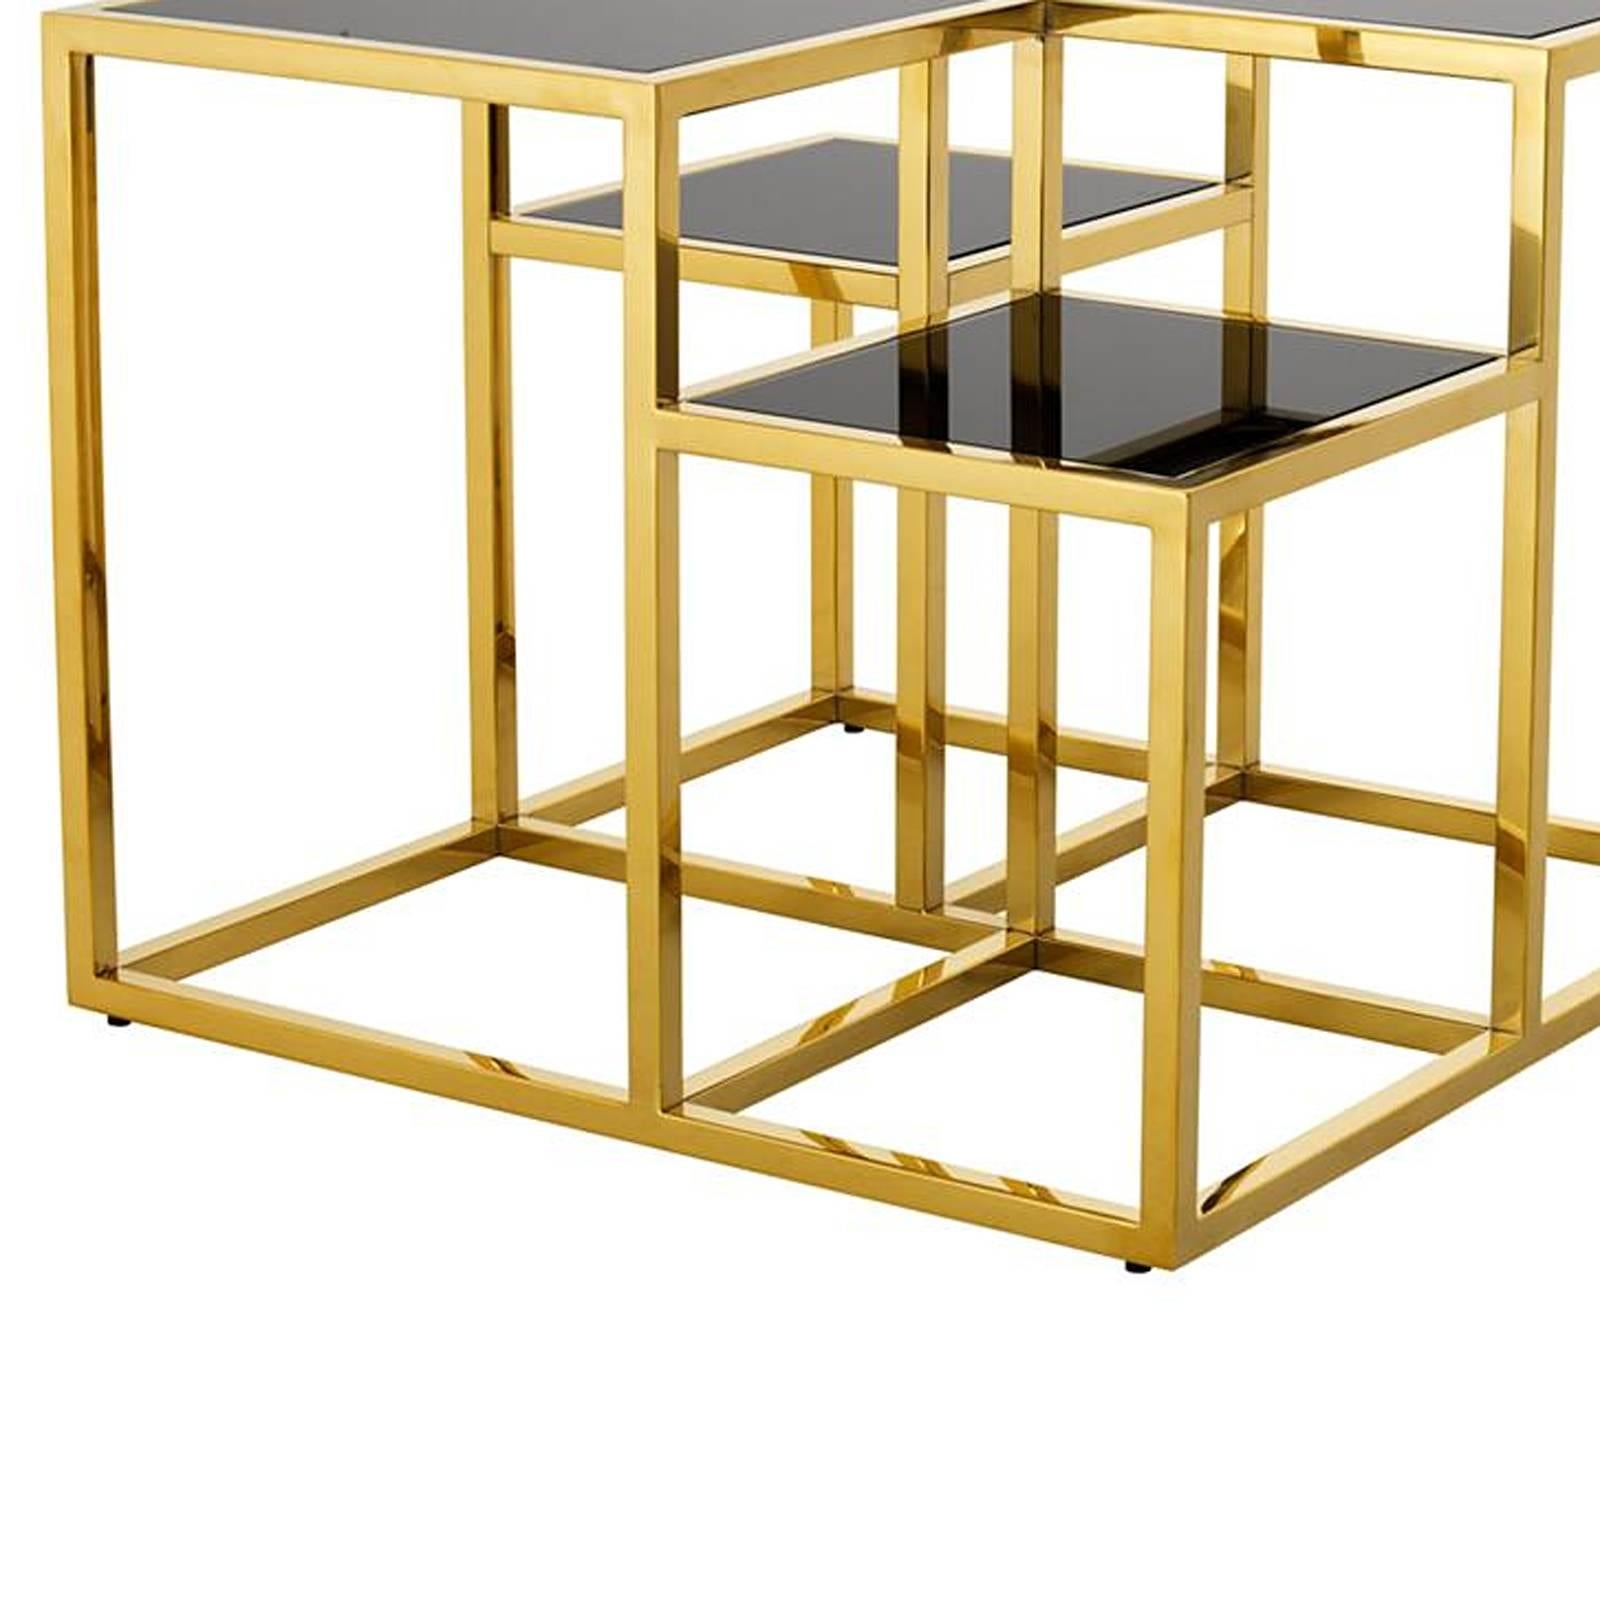 Side table square tops in gold finish,
with smoked glass tops.
also available in polished stainless steel
and smoked glass tops.
